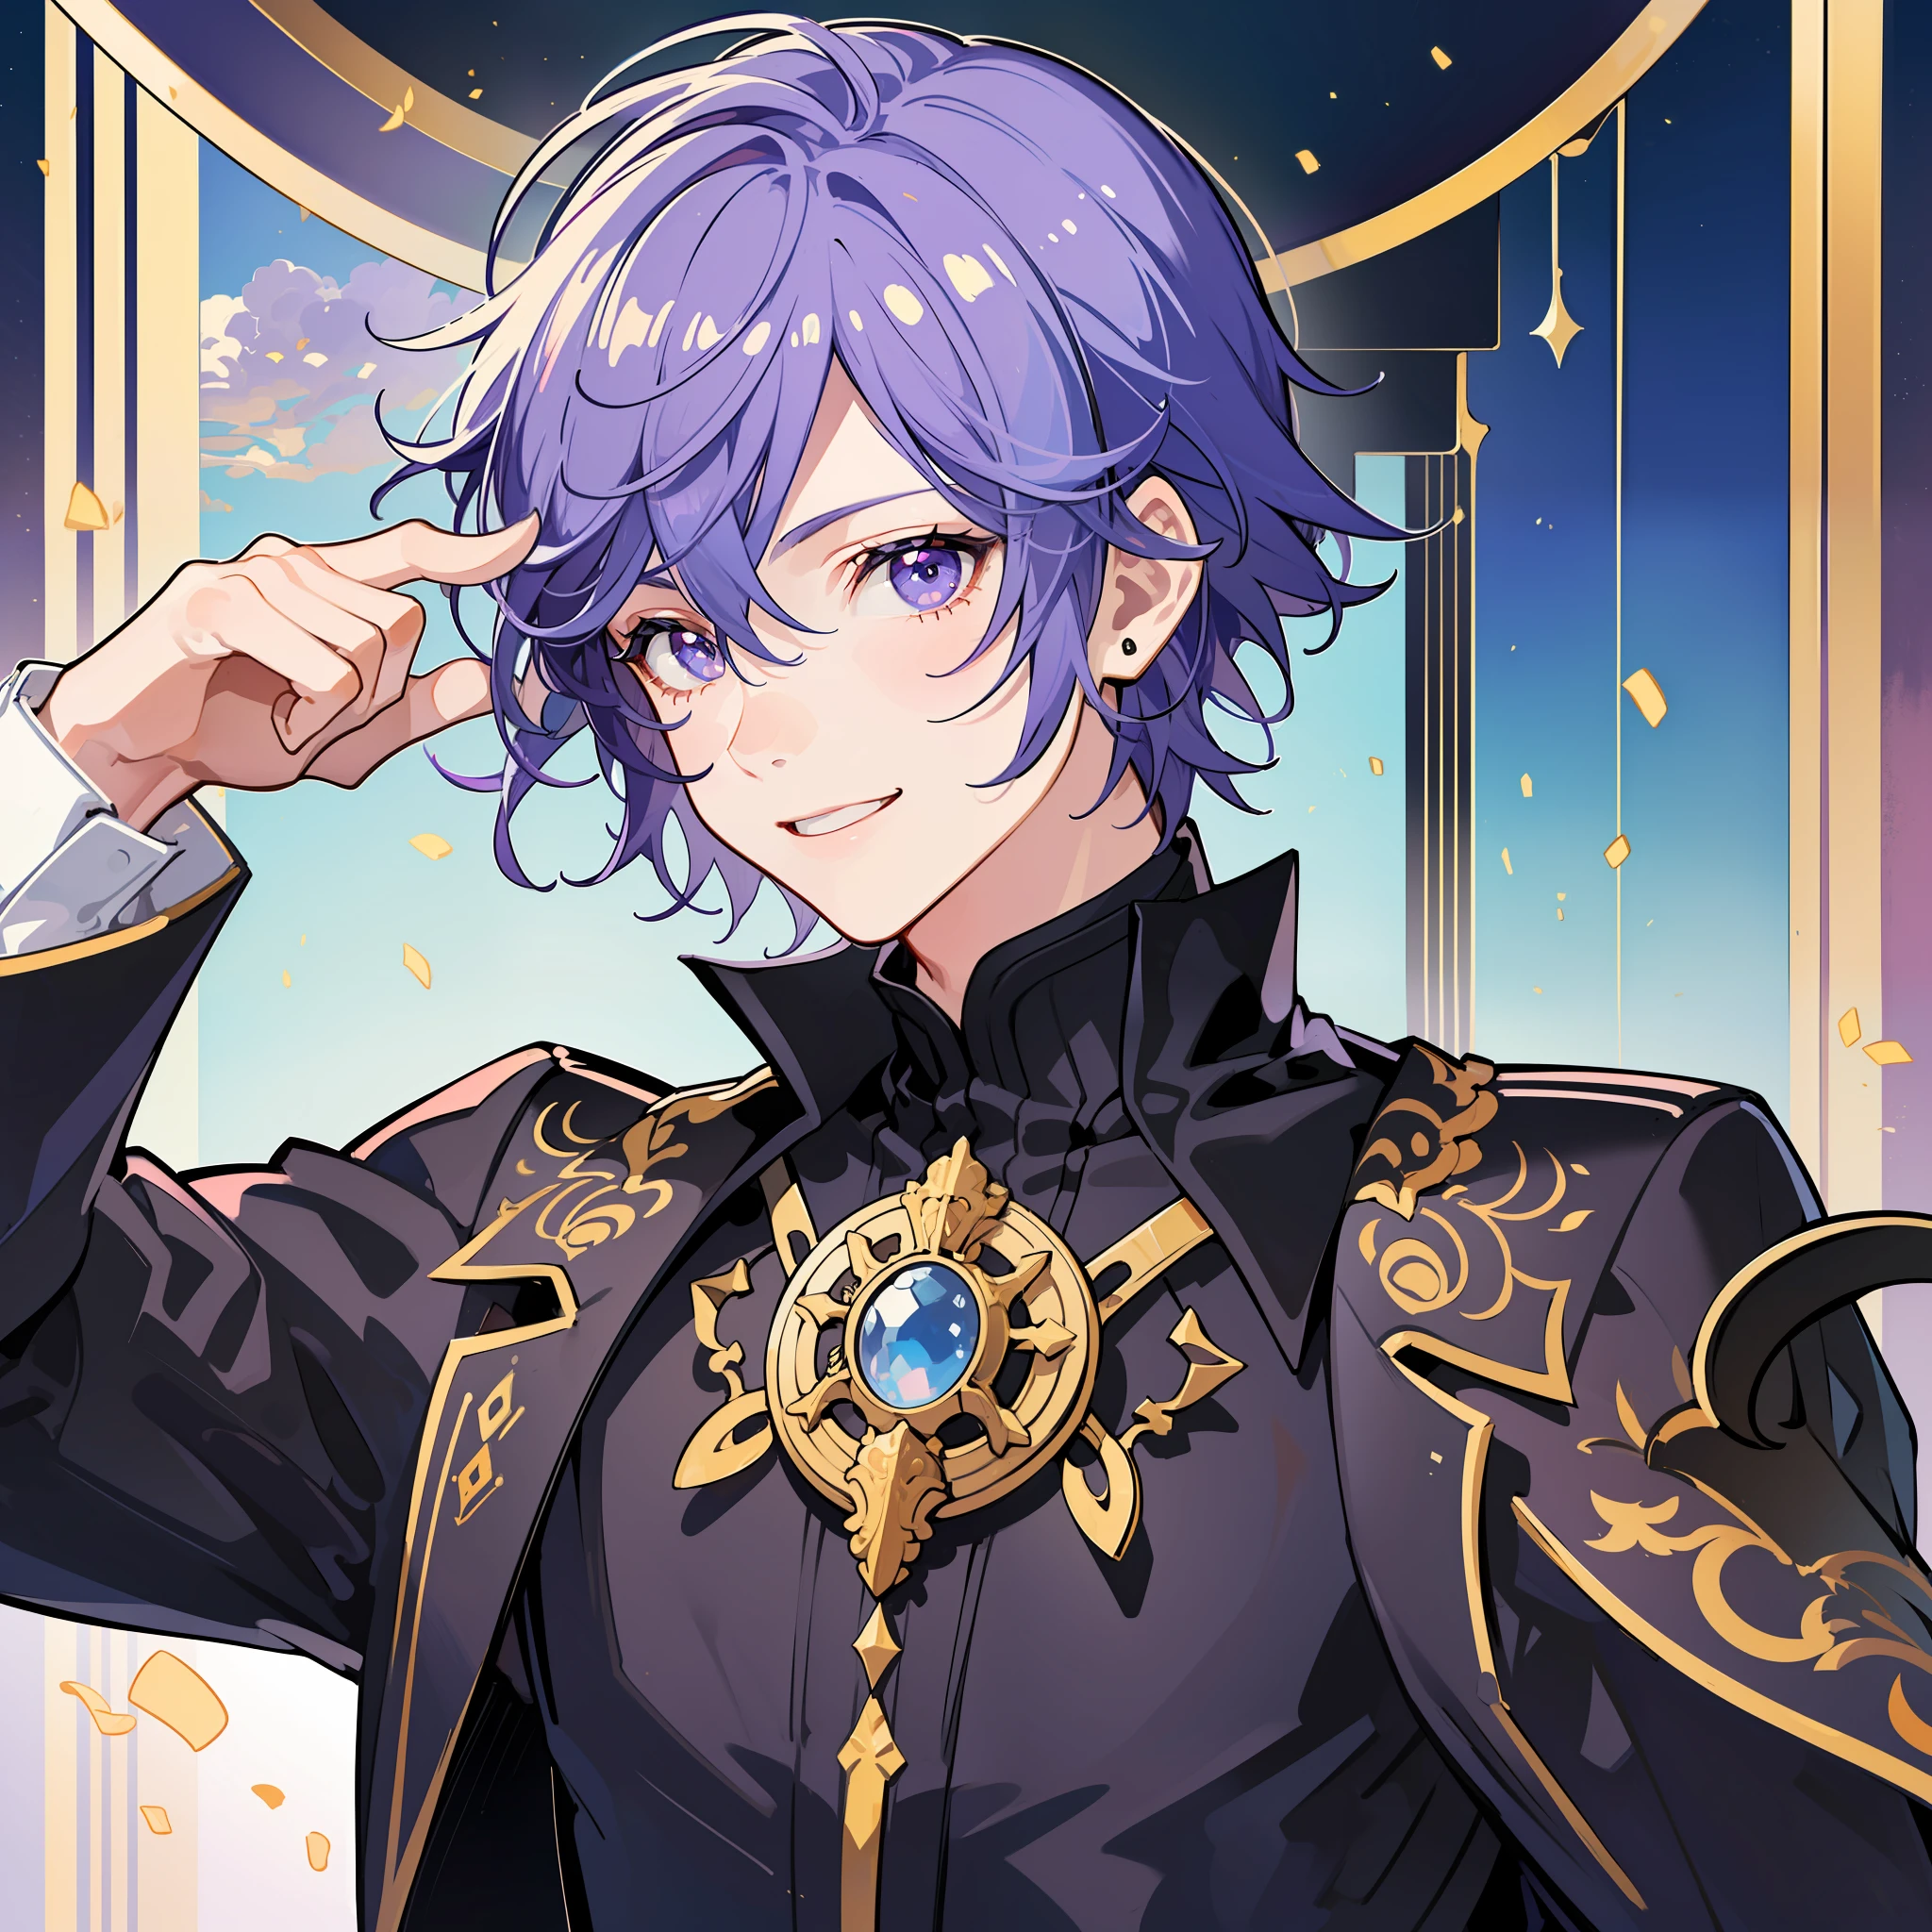 ((masterpiece)),(((best quality))), (high-quality, breathtaking),(expressive eyes, perfect face), 1boy, male, short light purple hair, beautiful purple eyes, smiling, black idol outfit, knight, wearing black pants, shine, glow, sunshine, blue sky, portrait, solo, one person, wallpaper